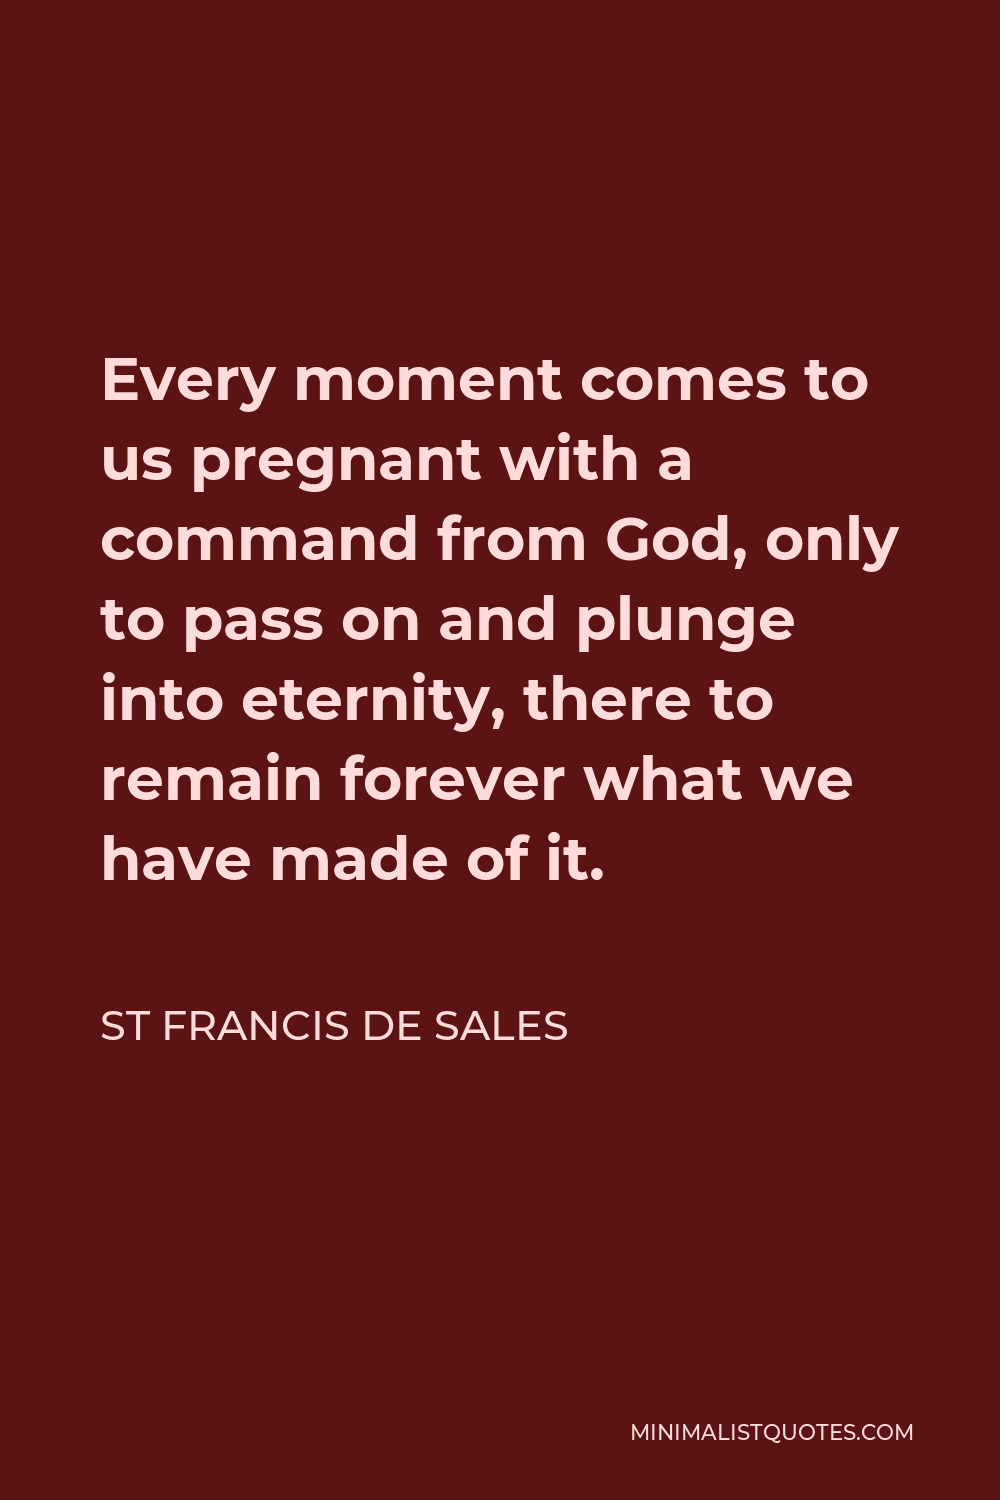 St Francis De Sales Quote - Every moment comes to us pregnant with a command from God, only to pass on and plunge into eternity, there to remain forever what we have made of it.